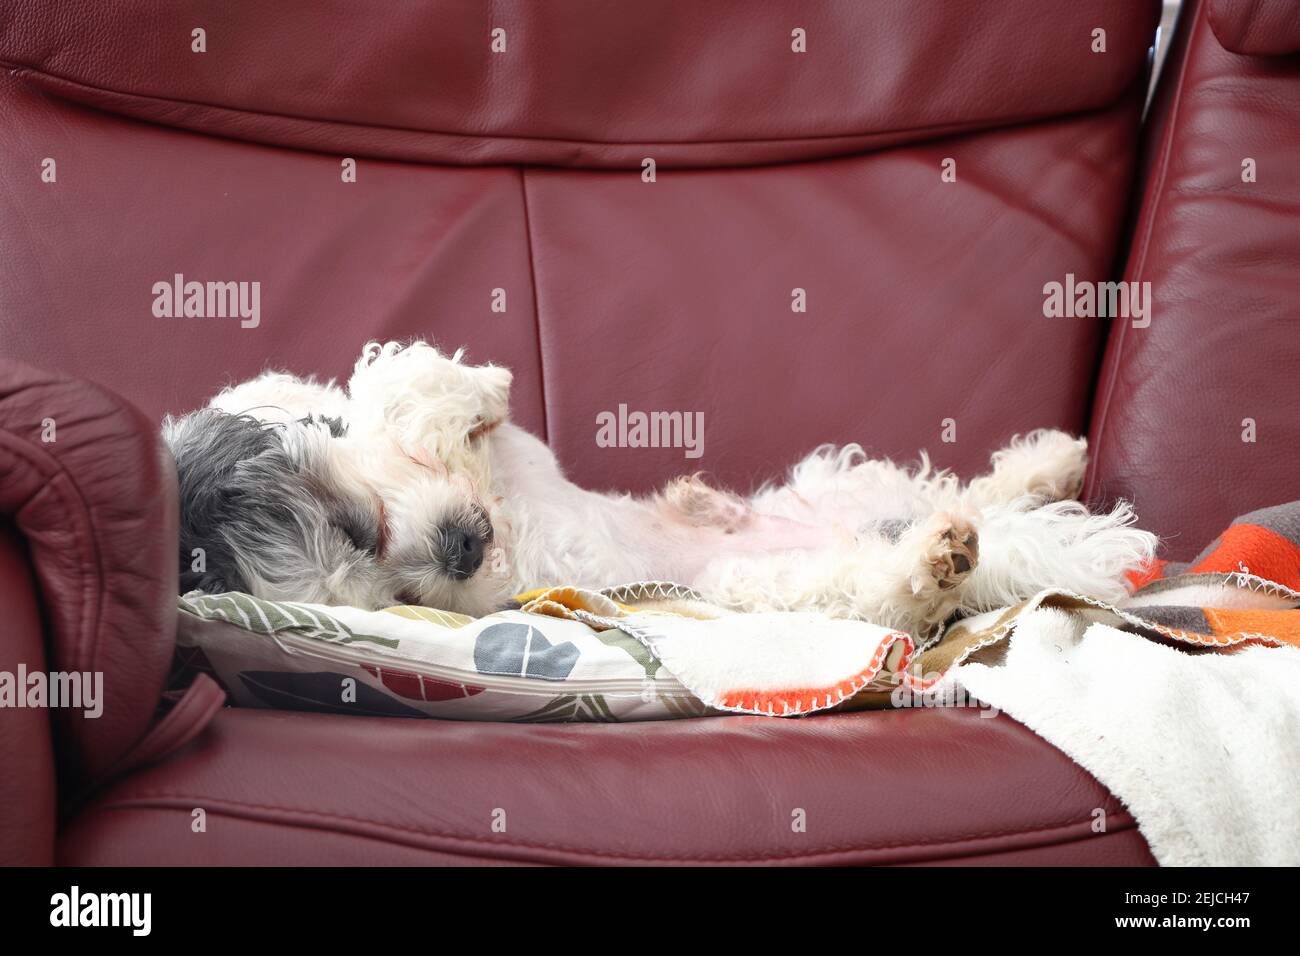 chilling dog on a sofa Stock Photo